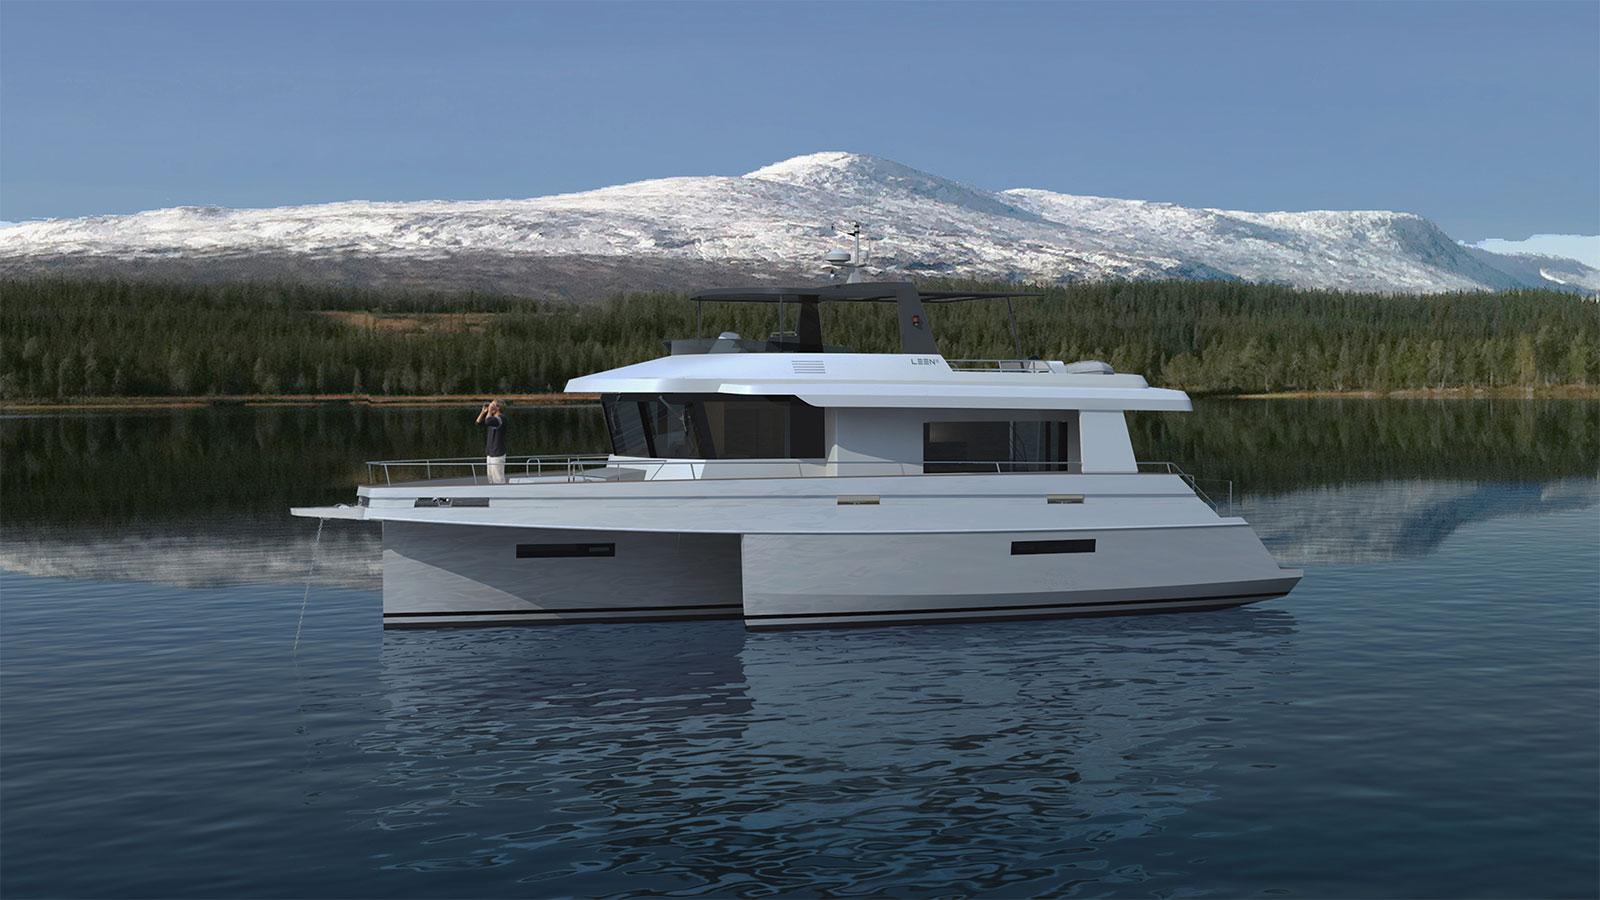 The Leen 56 combines all the advantages of the travel yacht